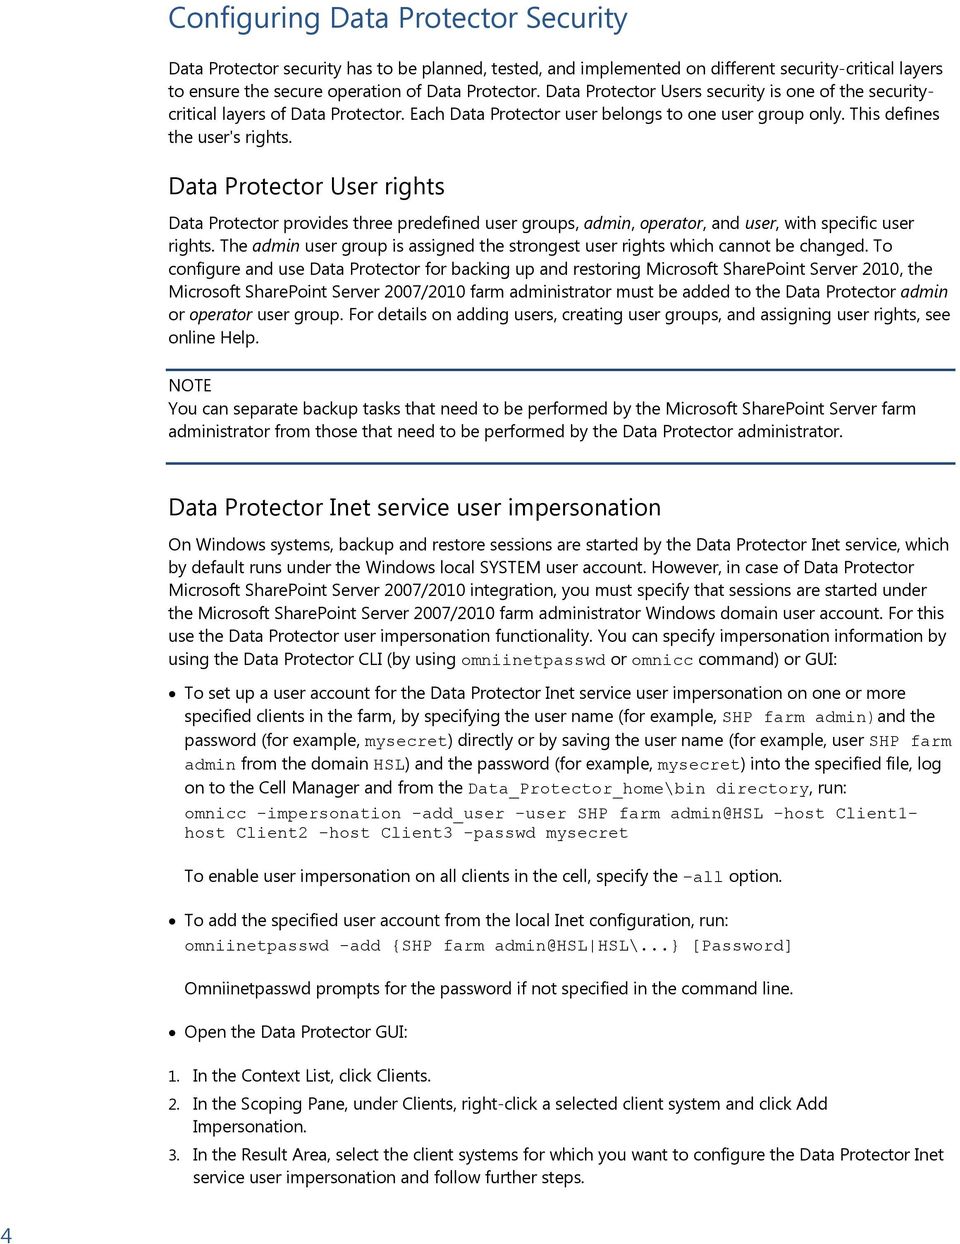 Data Protector User rights Data Protector provides three predefined user groups, admin, operator, and user, with specific user rights.